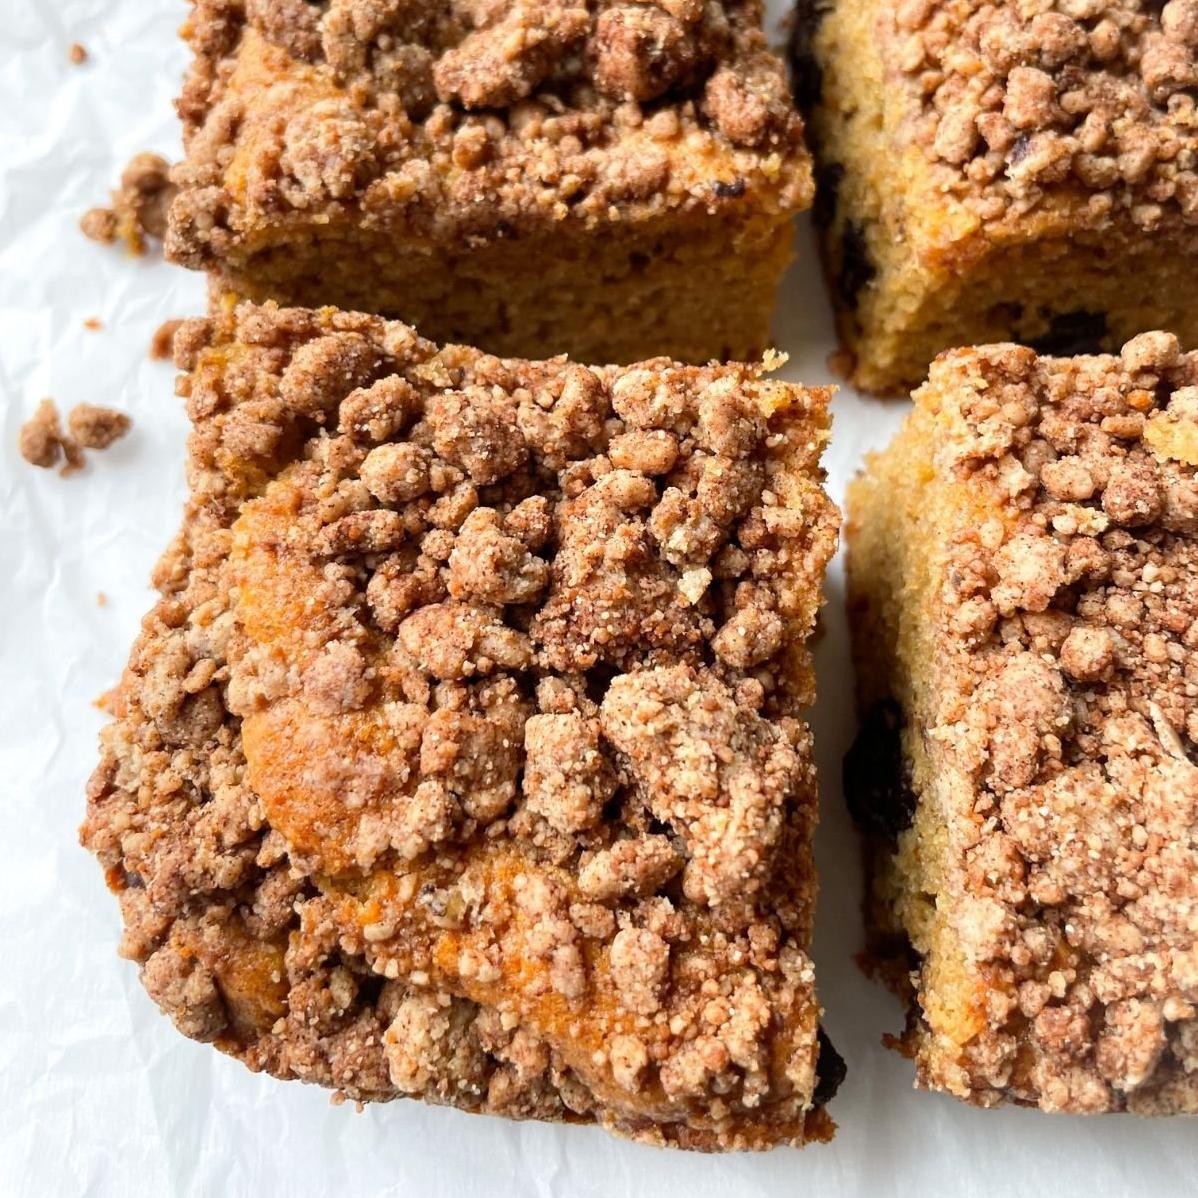  Get ready to indulge in a warm and comforting slice of almond coffee cake.